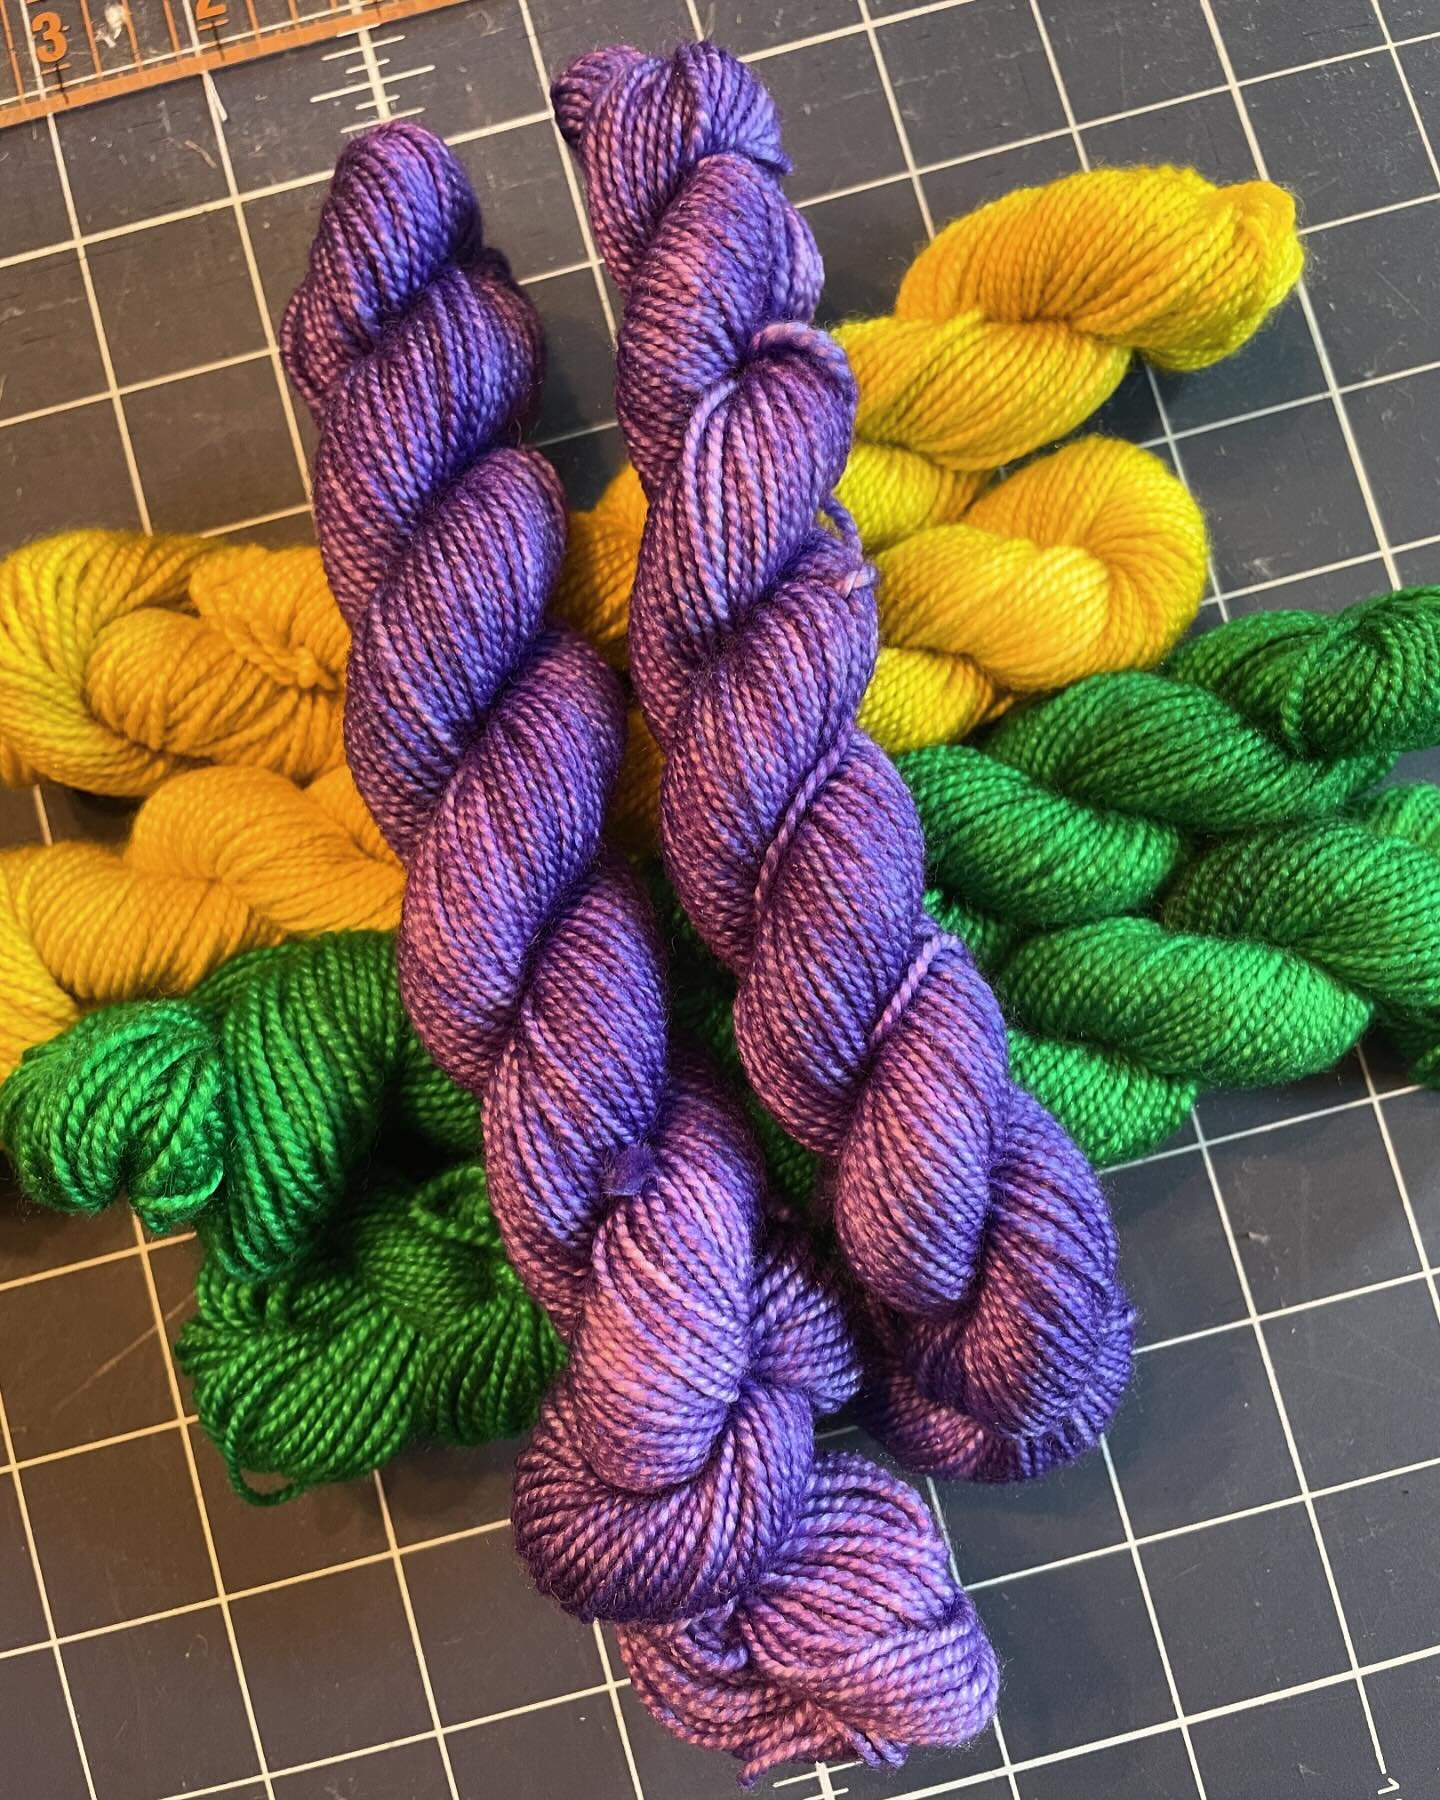 I&rsquo;ve decided I need a pair of Mardi Gras socks in my life. What&rsquo;s everyone&rsquo;s favorite pattern for shorties?  Pictured: Tanzanite, Citrine and Emerald on Shimmer minis. Happy Friday!  #mardigras #socks #yarn #emerald #tanzanite #citr